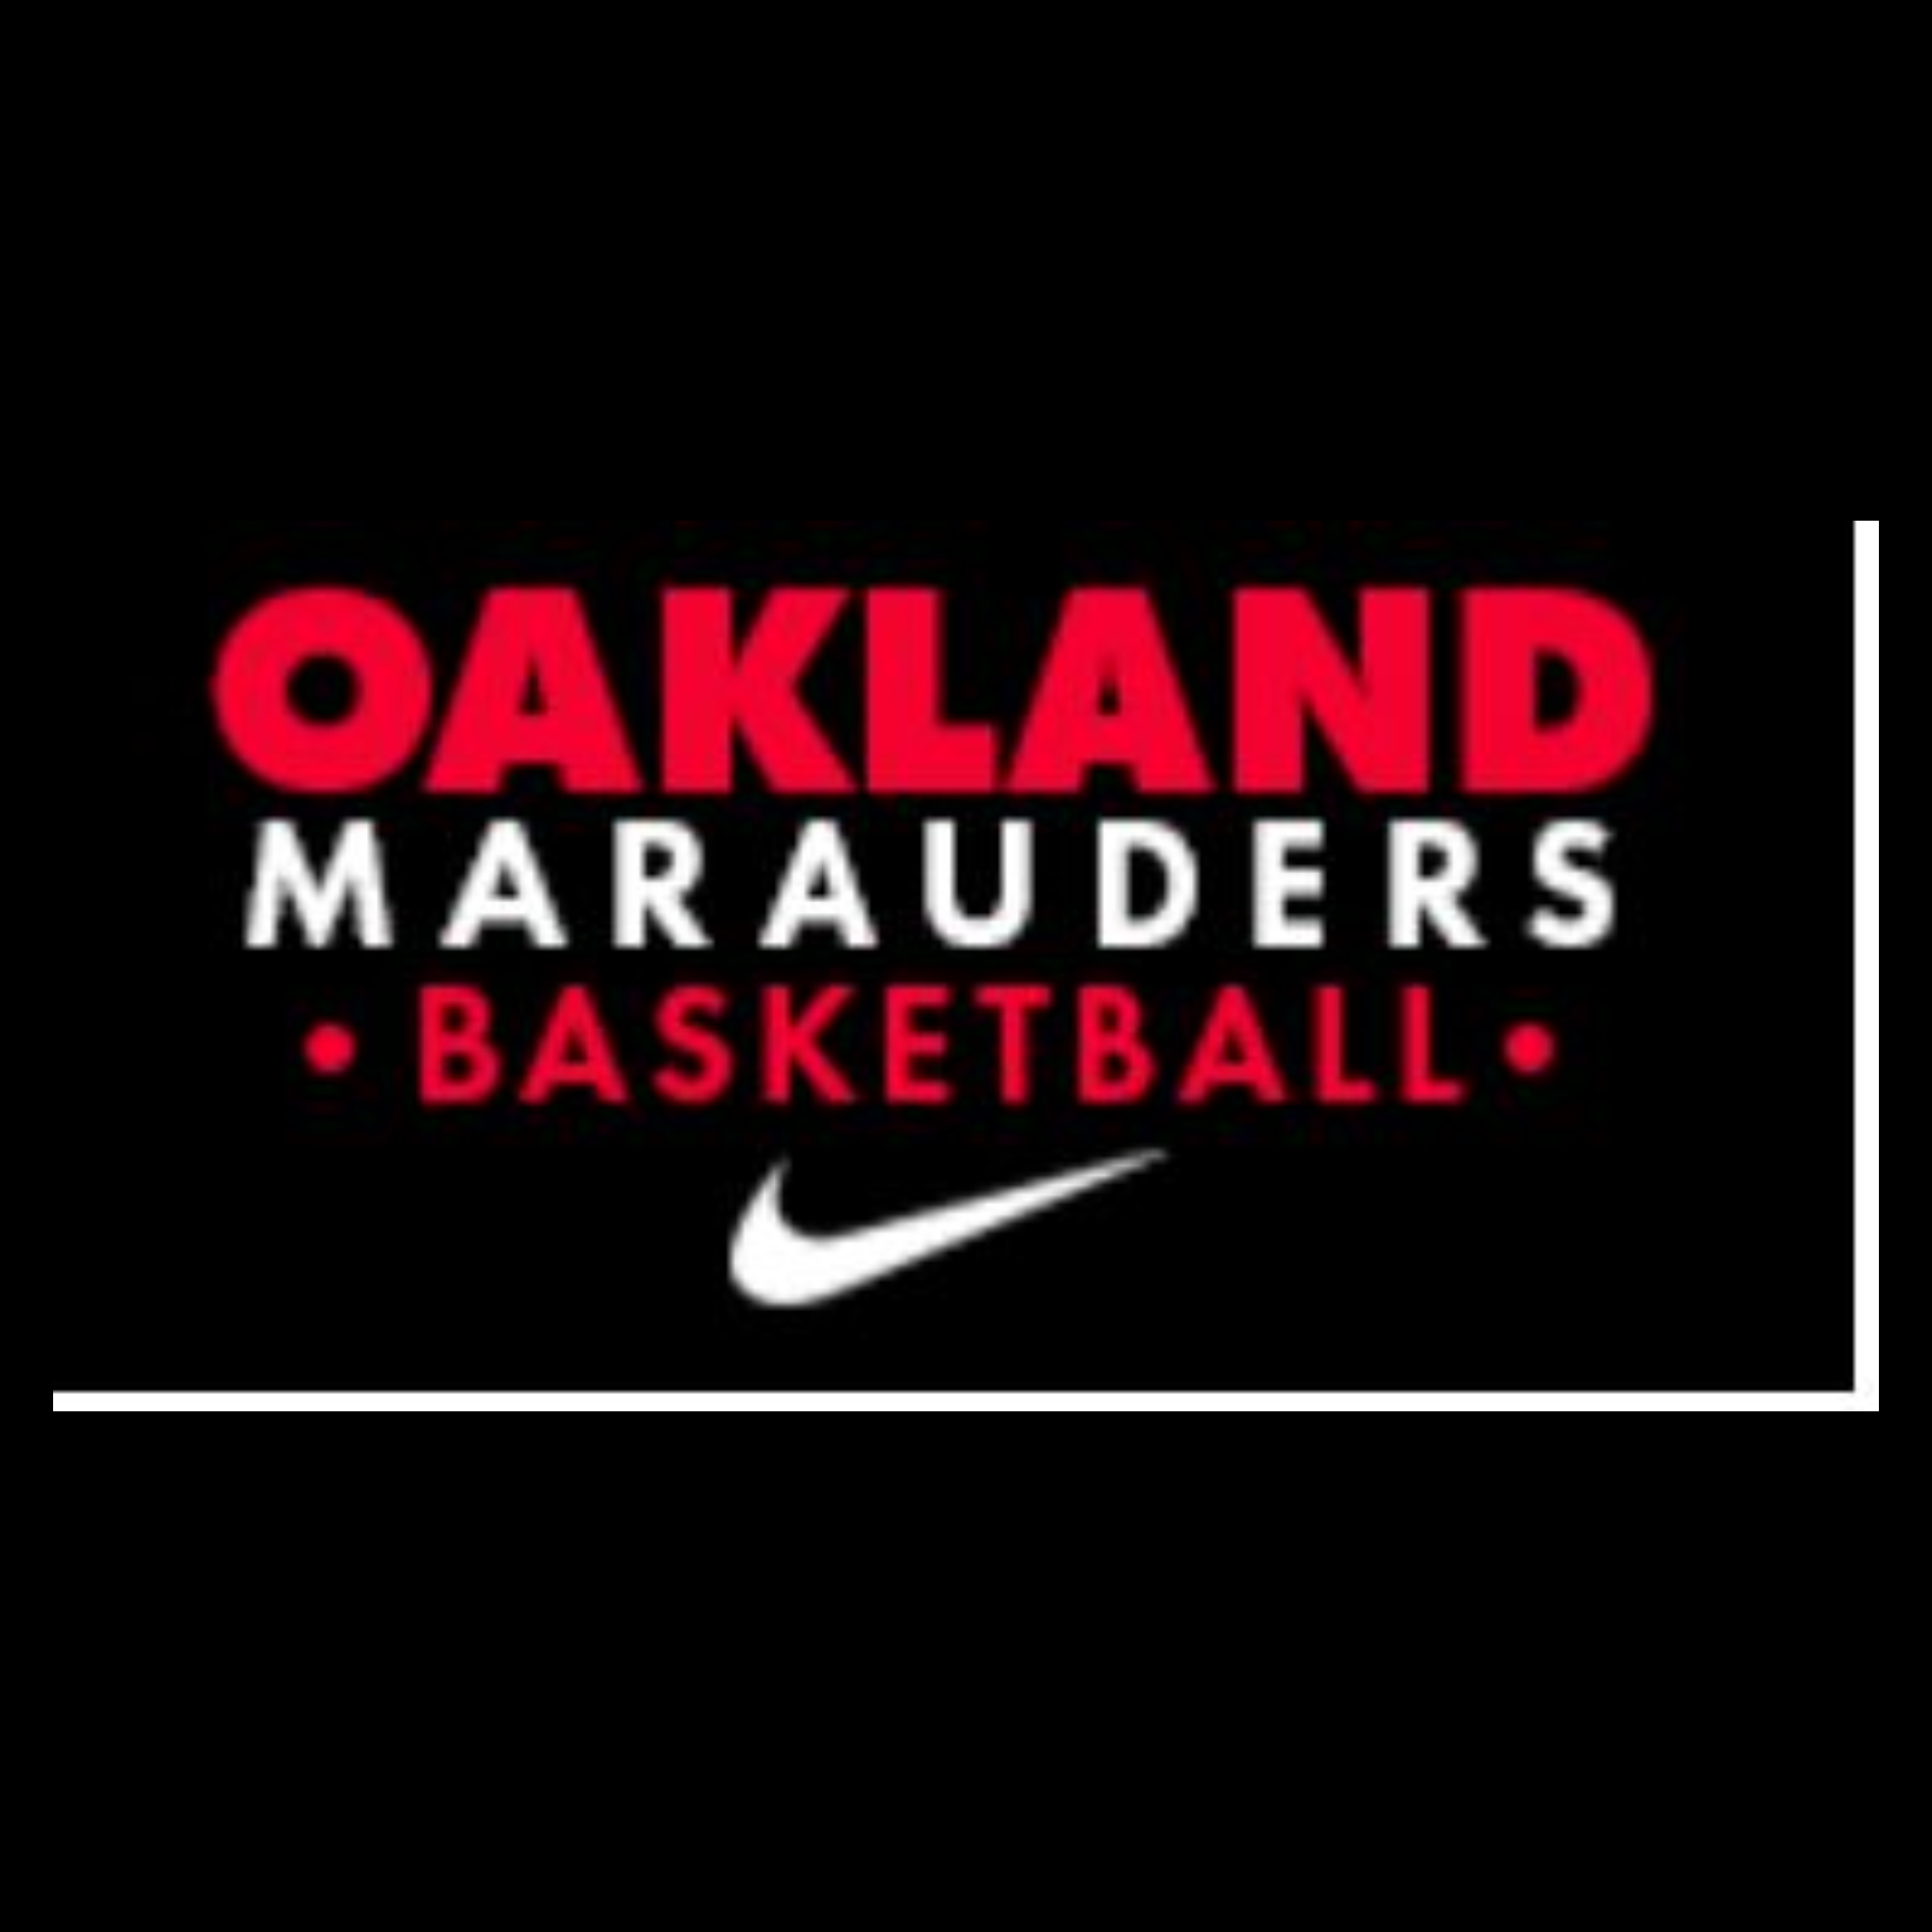 The official logo of Oakland Marauders